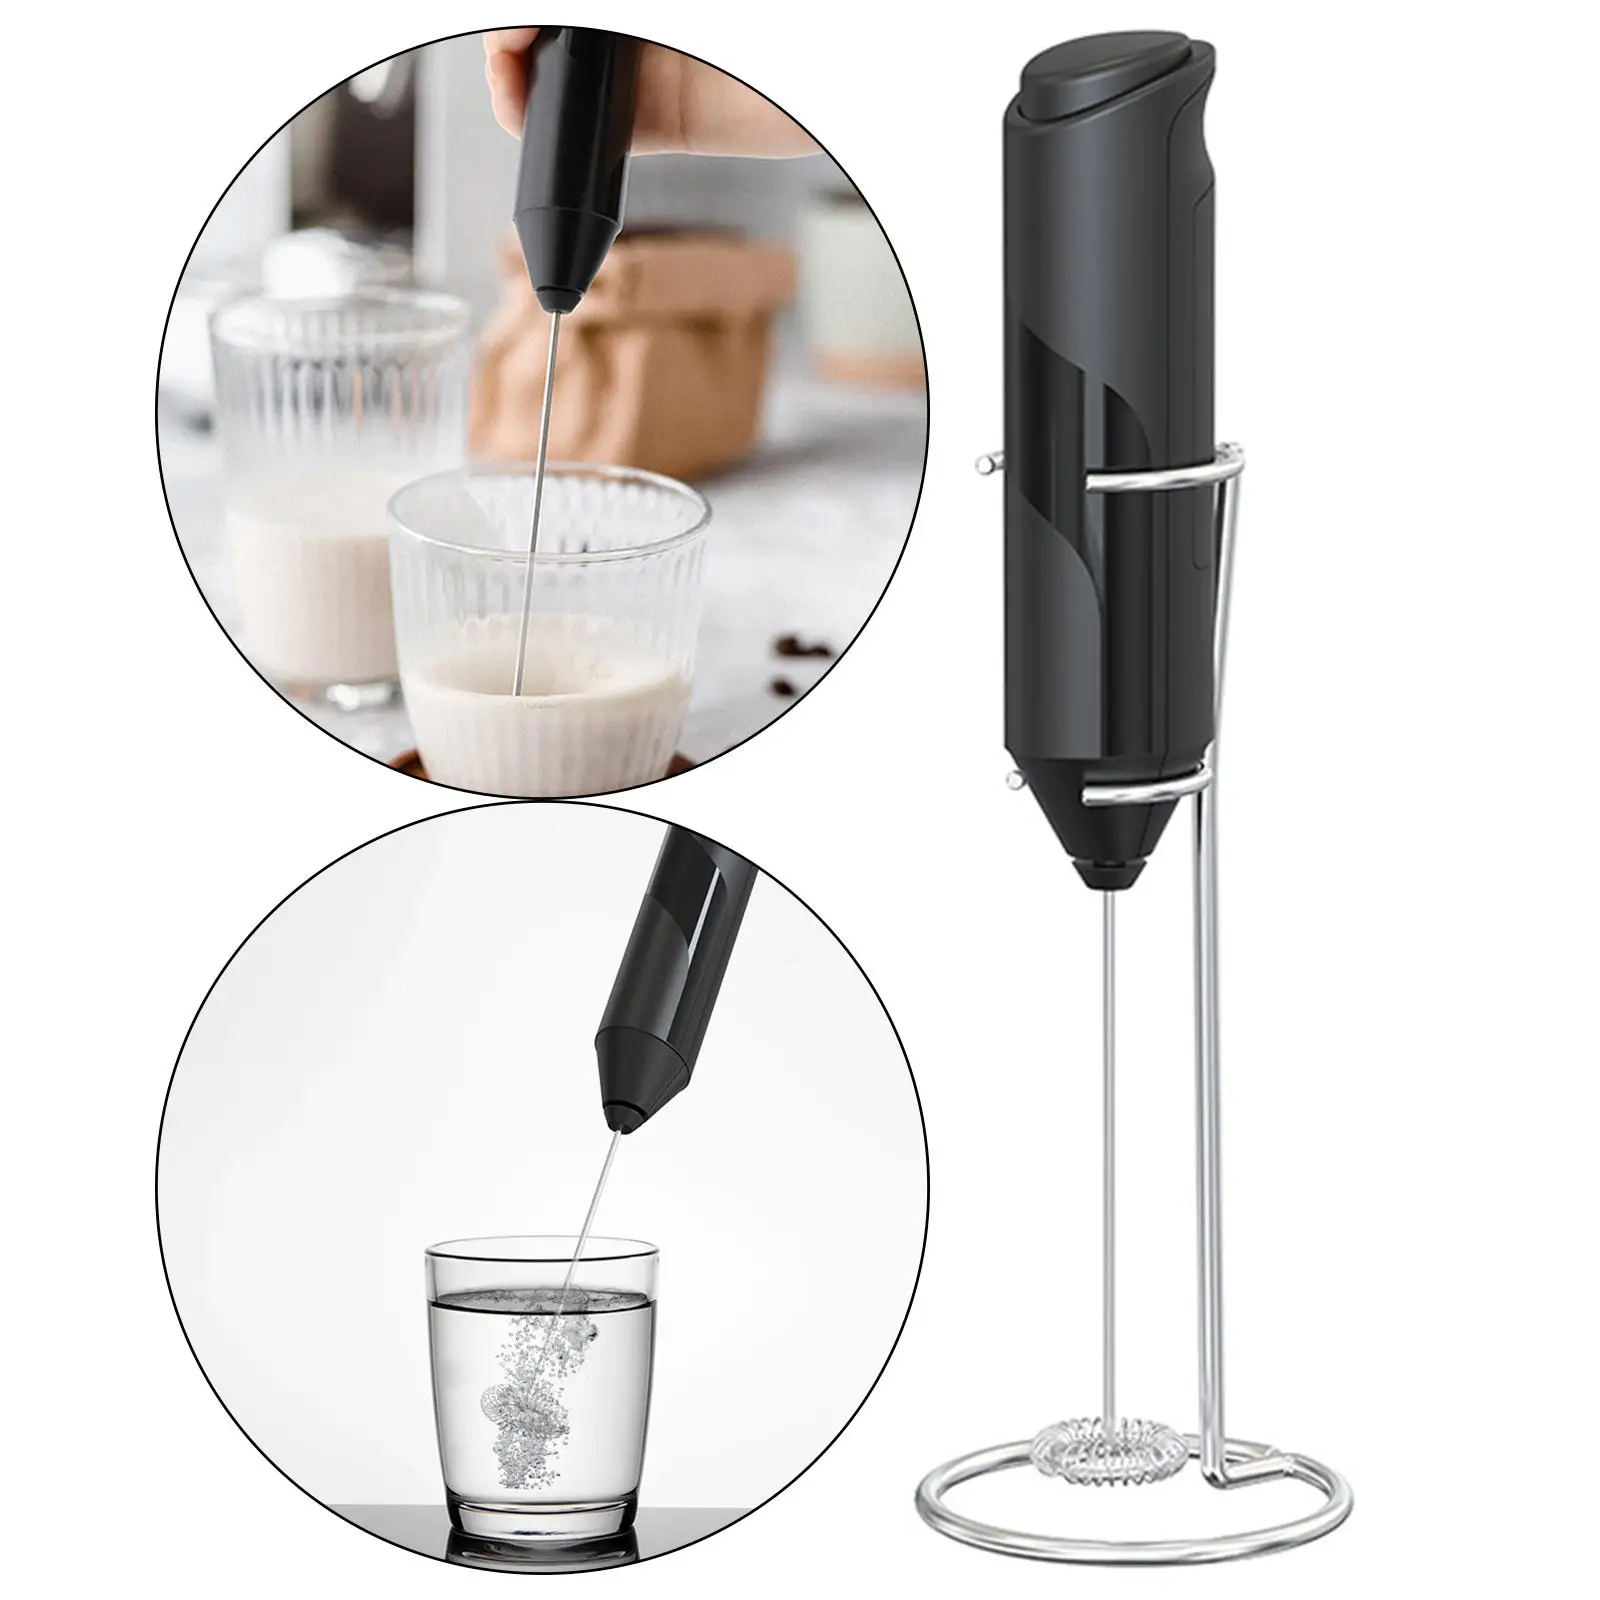 Handheld Electric Frother Mixer Blender Coffee Frother Foam Maker Egg Beater Egg Whisk for Cream Hot Chocolate Coffee Matcha